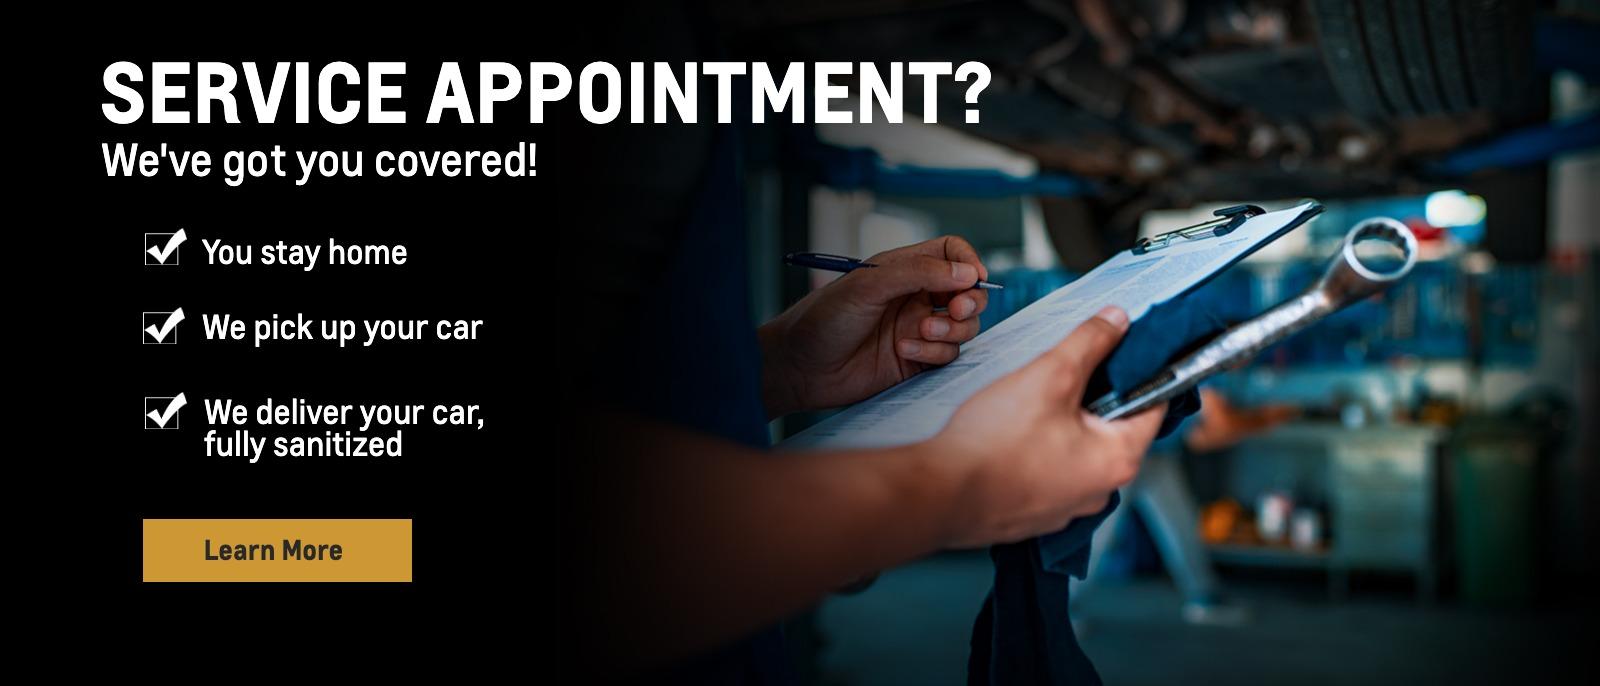 Service Appointment, We've got you covered